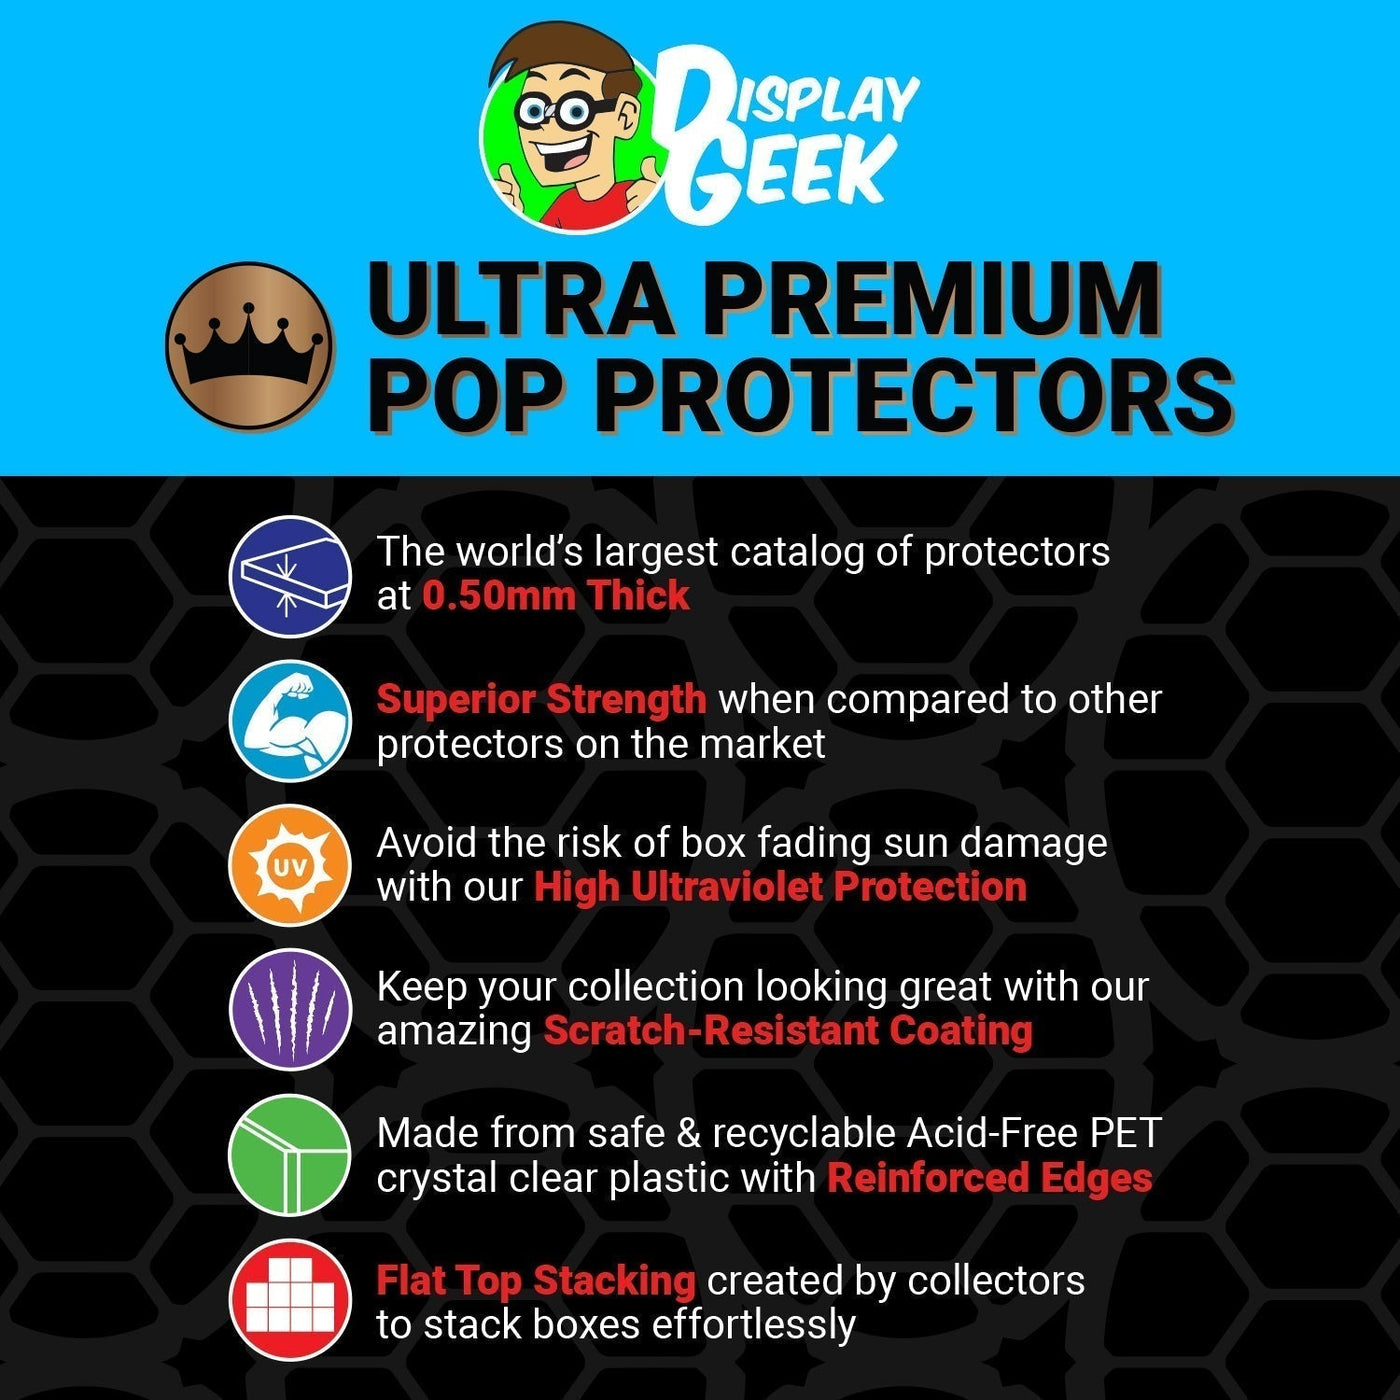 Pop Protector for 6 inch Baymax with Butterfly #1233 Super Size Funko Pop on The Protector Guide App by Display Geek